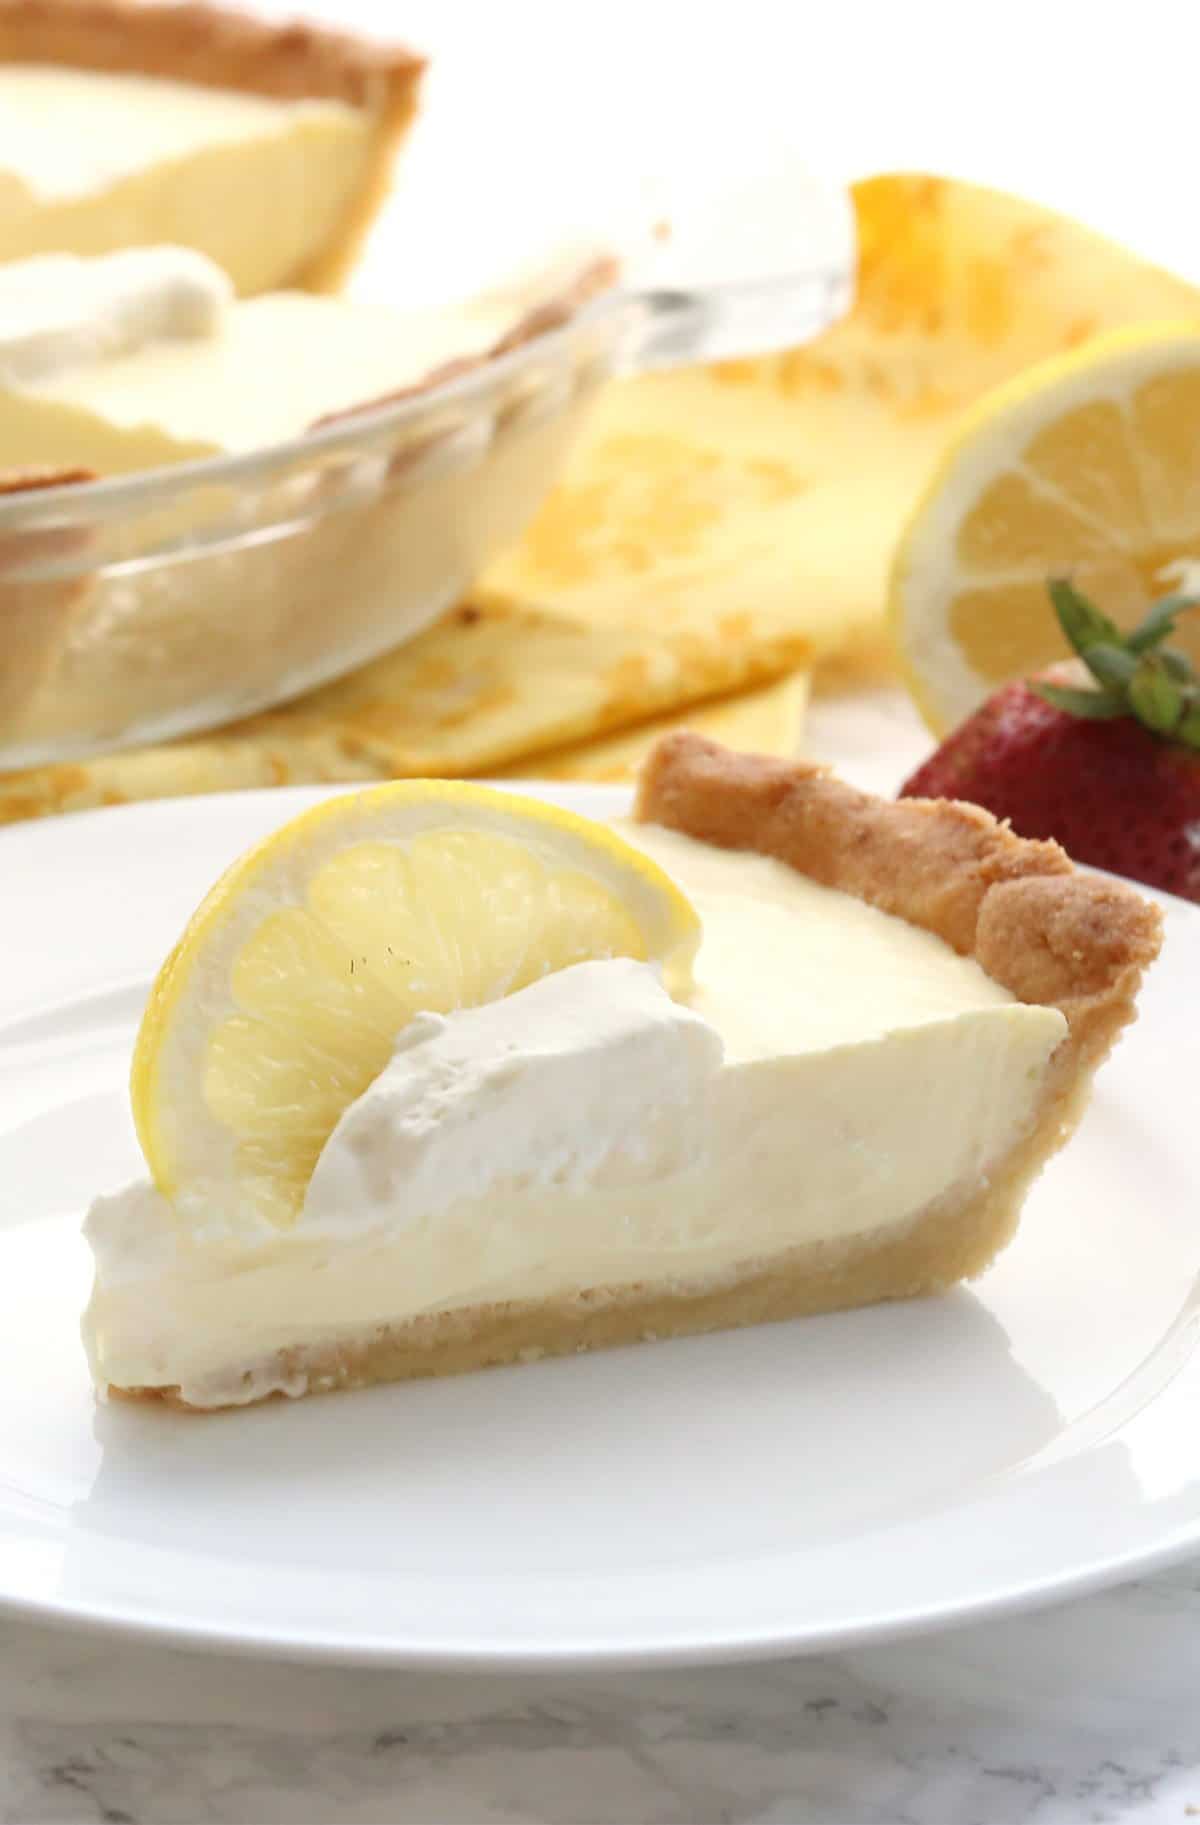 A slice of keto lemon pie on a white plate with a slice of lemon top. The remaining pie is in the background.